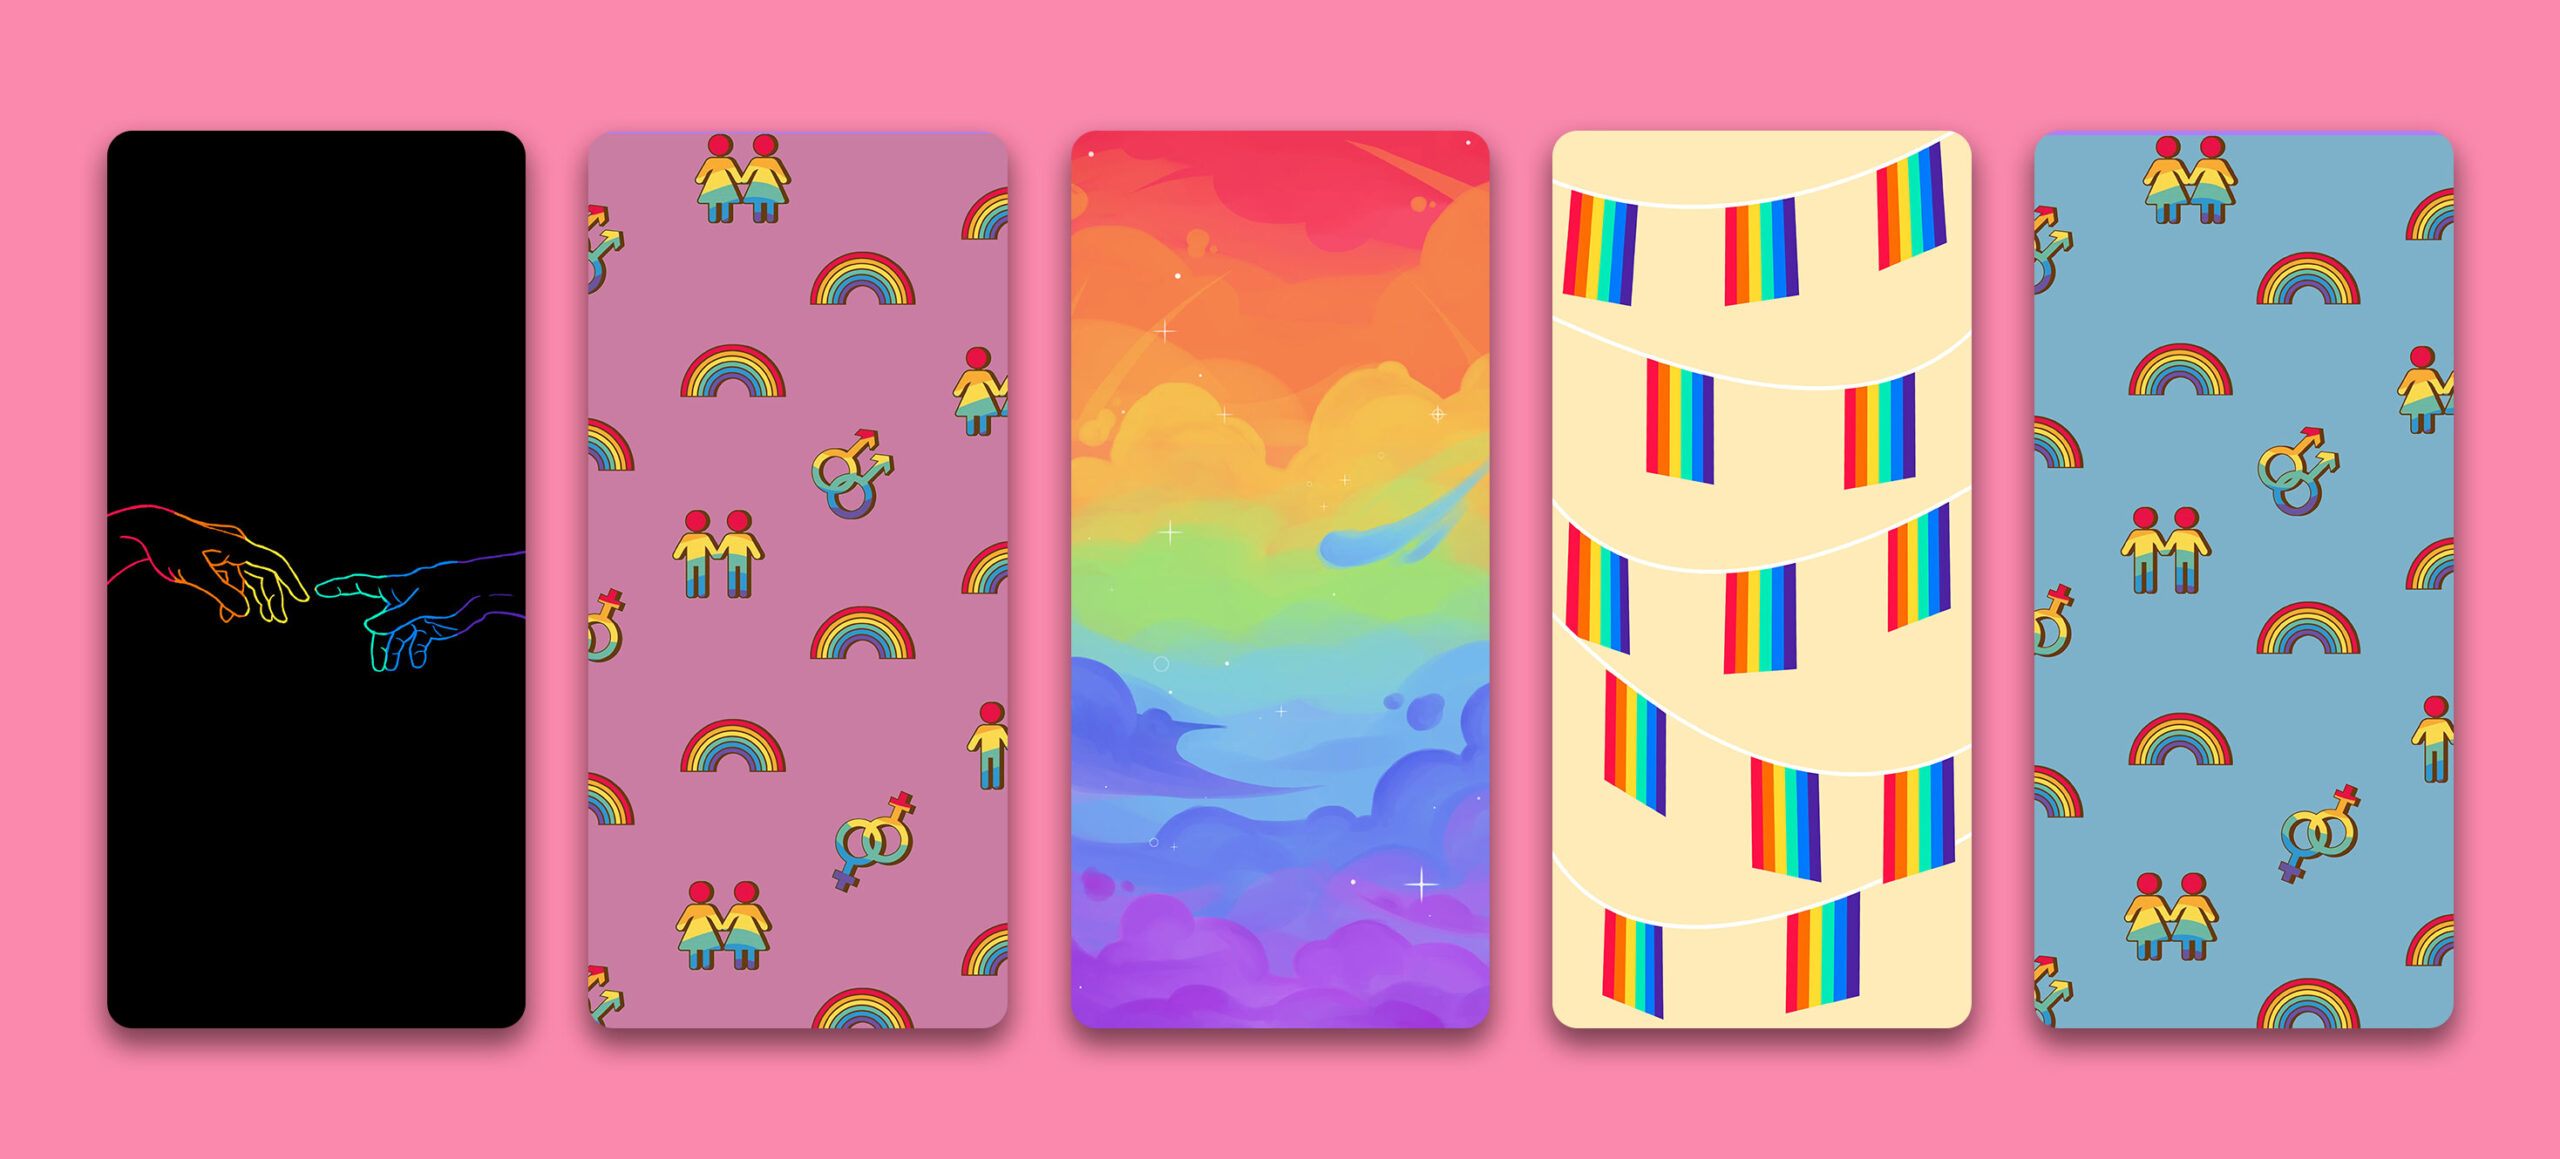 pride app icons pack preview 6